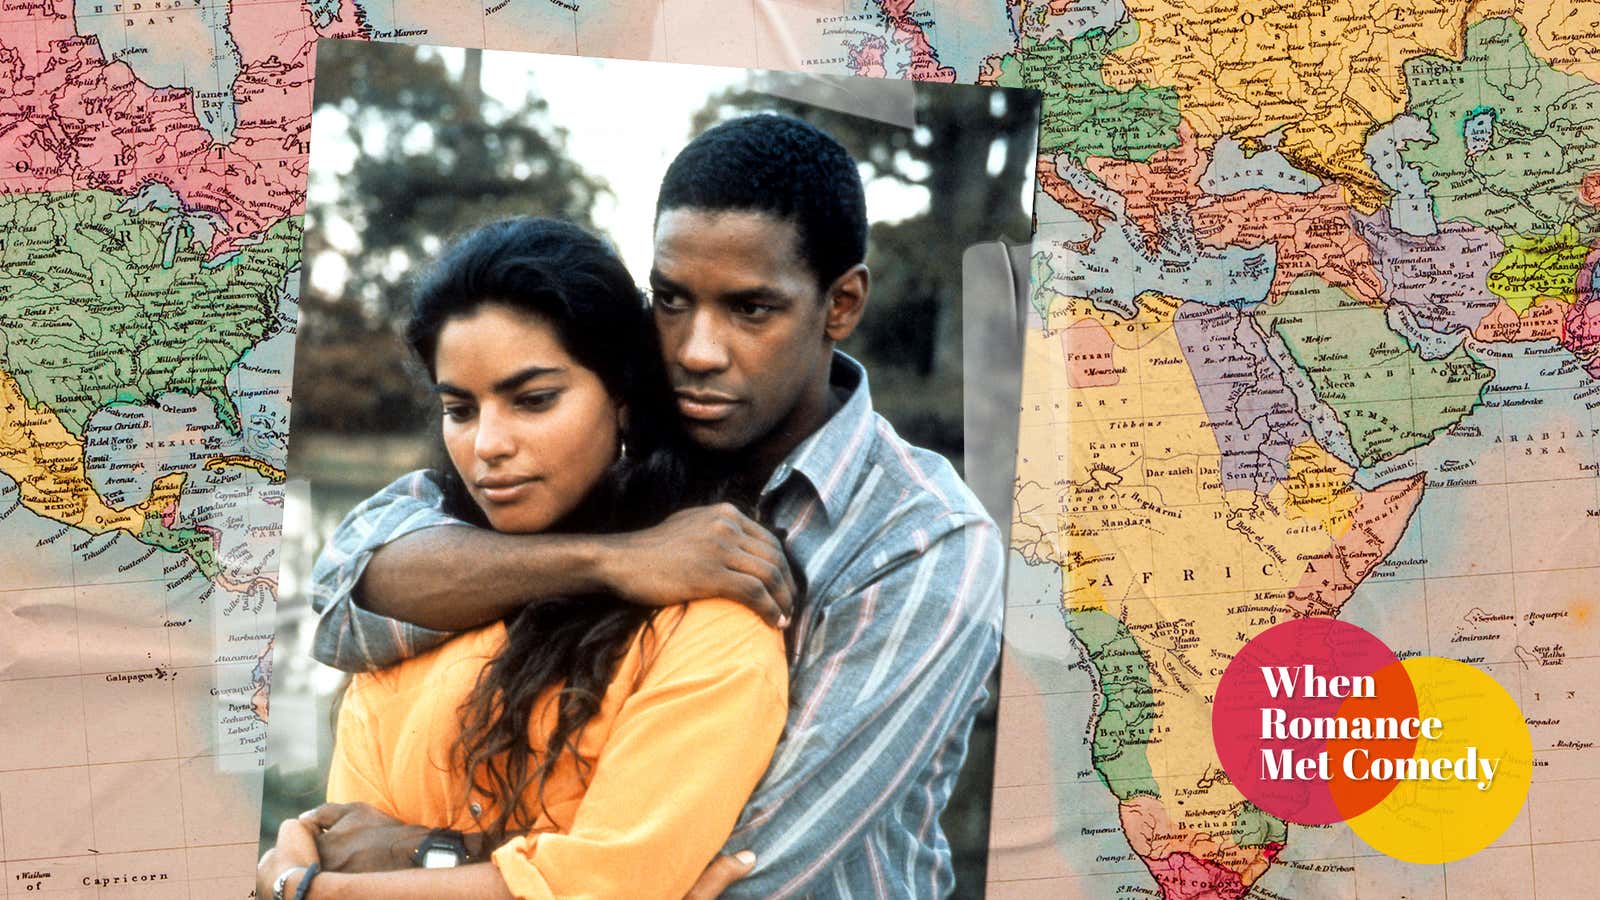 It’s time to rediscover one of Denzel Washington’s loveliest and most under-seen romances